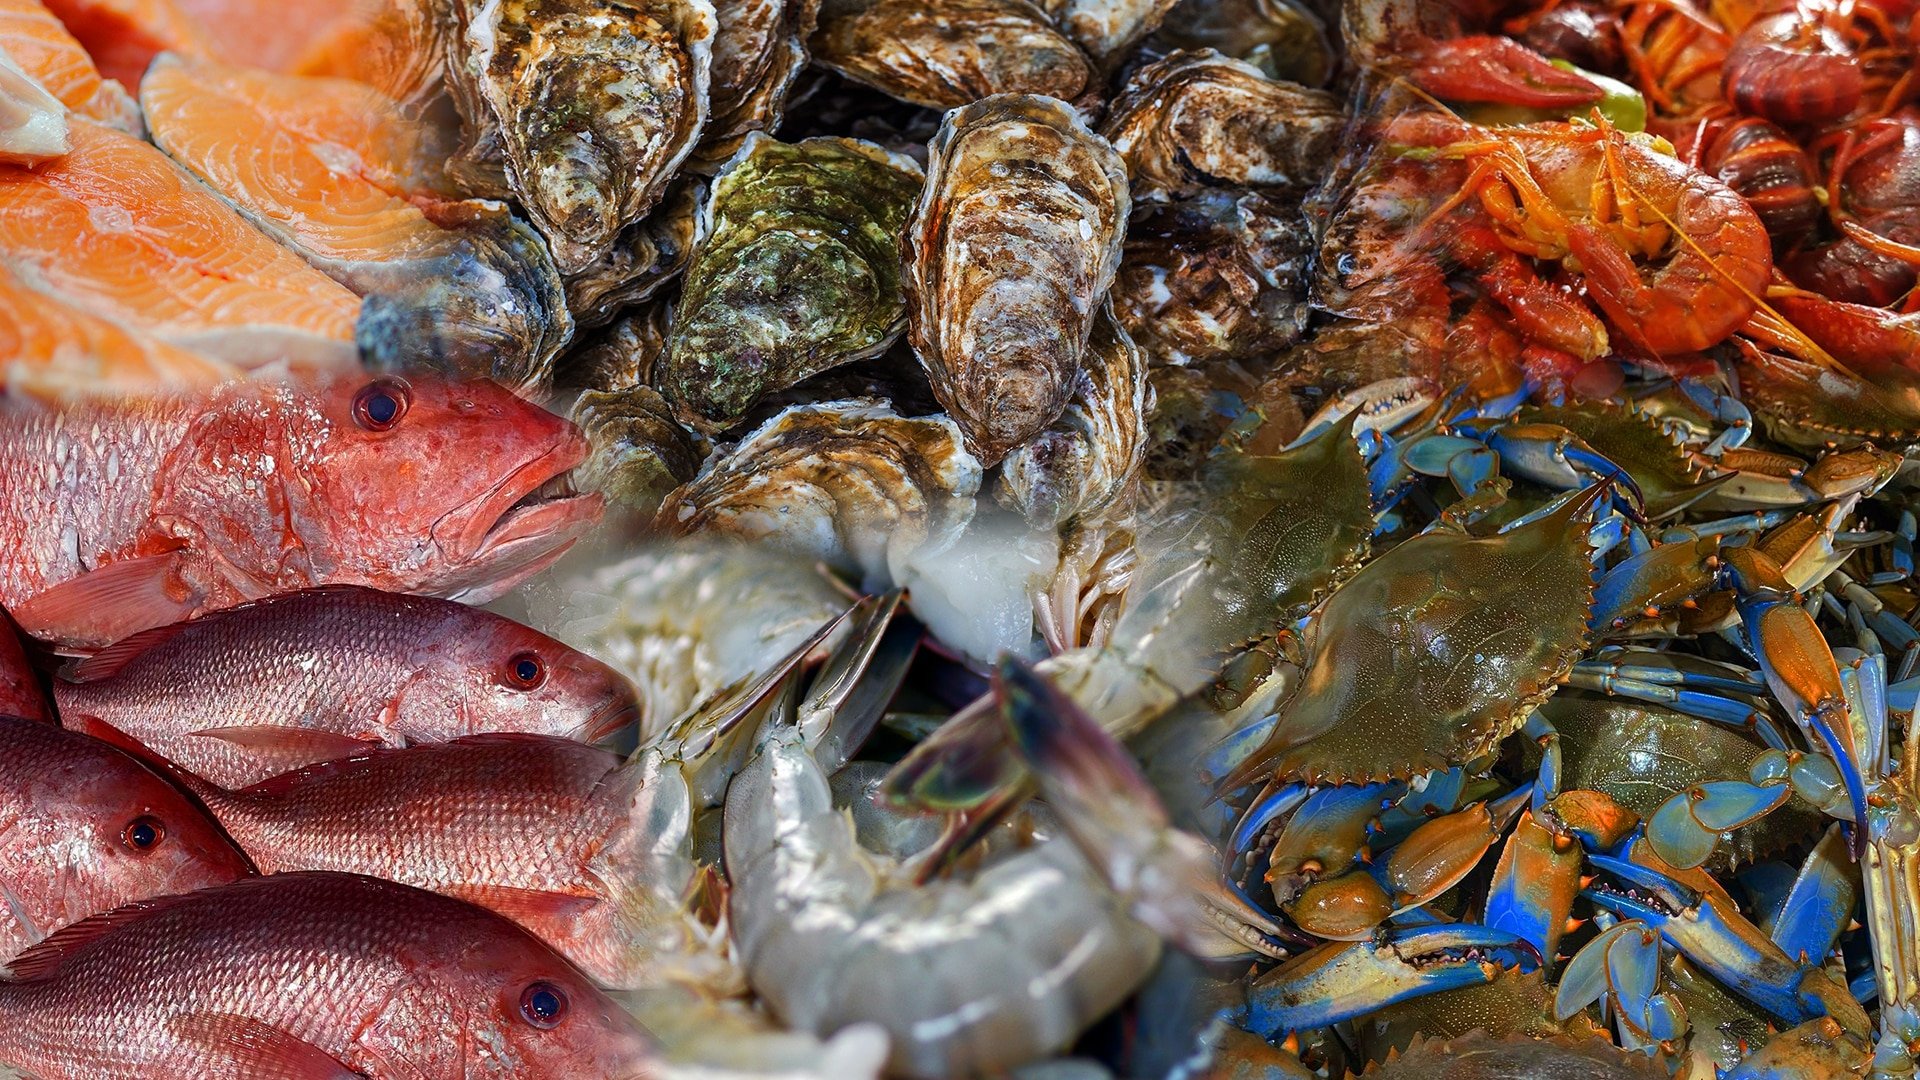 seafood market,seafood restaurant,cajun,cajun menu,fried fish,fish platter,fried oysters,sweet potato fries,softshell crabs,raw oysters,crab,lump crab,jumbo crab,cobia,redfish,salmon,flunder,drum,snapper,trout,flounder